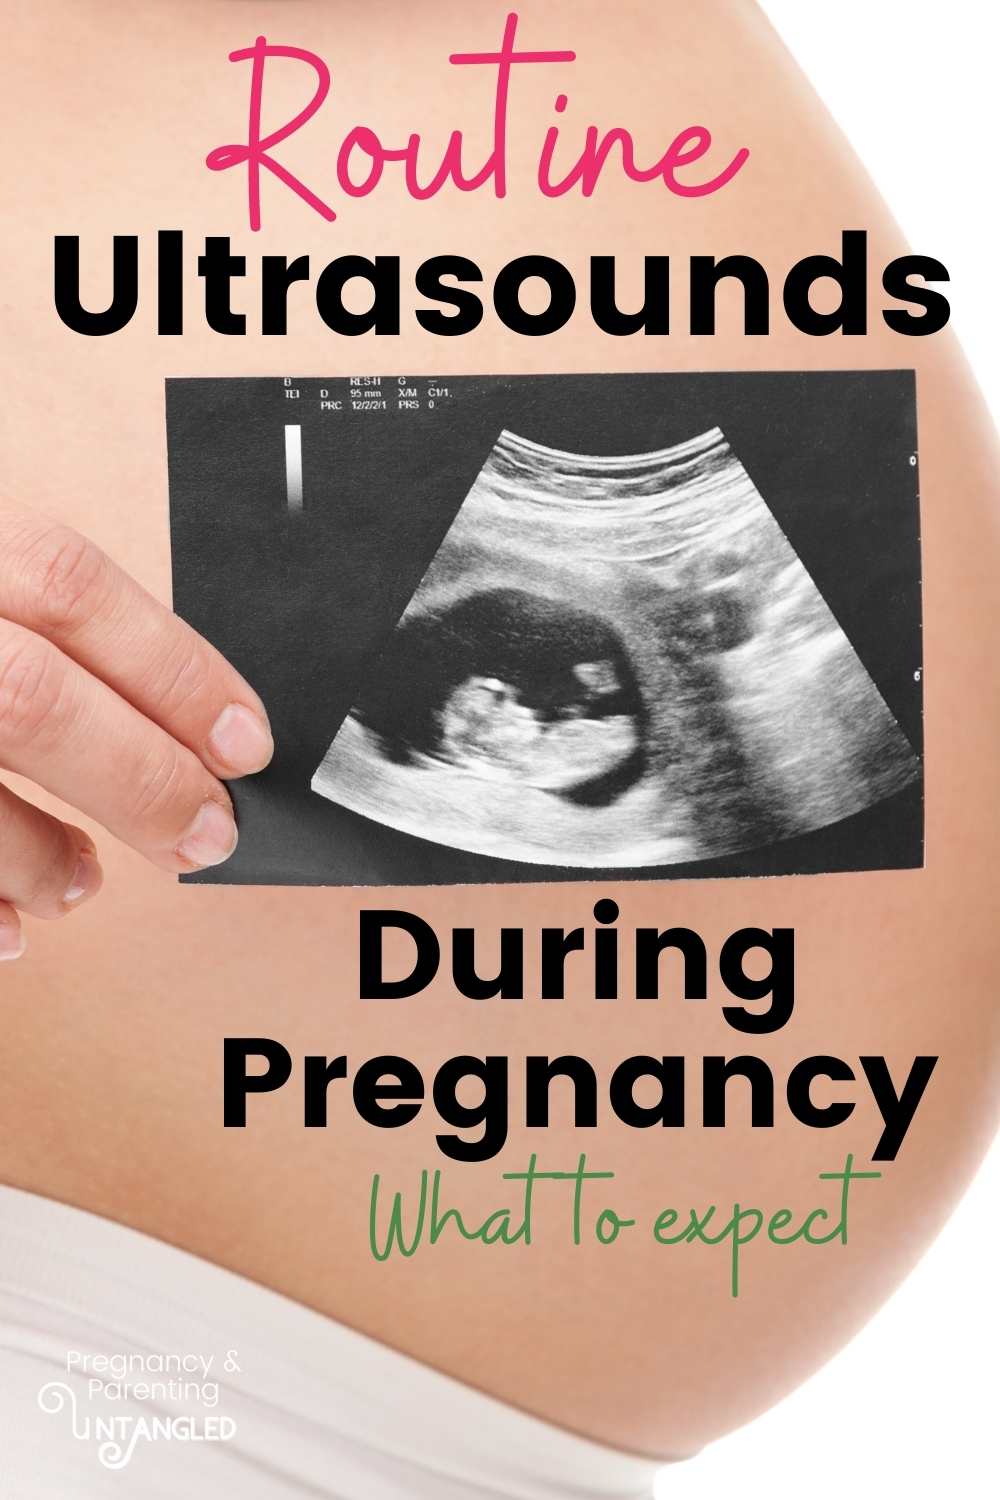 There are a few routine ultrasounds that are indicated during pregnancy. They give us important facts about our pregnancy, and today we have a maternal fetal medicine stenographer who's going to tell us what they're for, and what to expect! via @pullingcurls